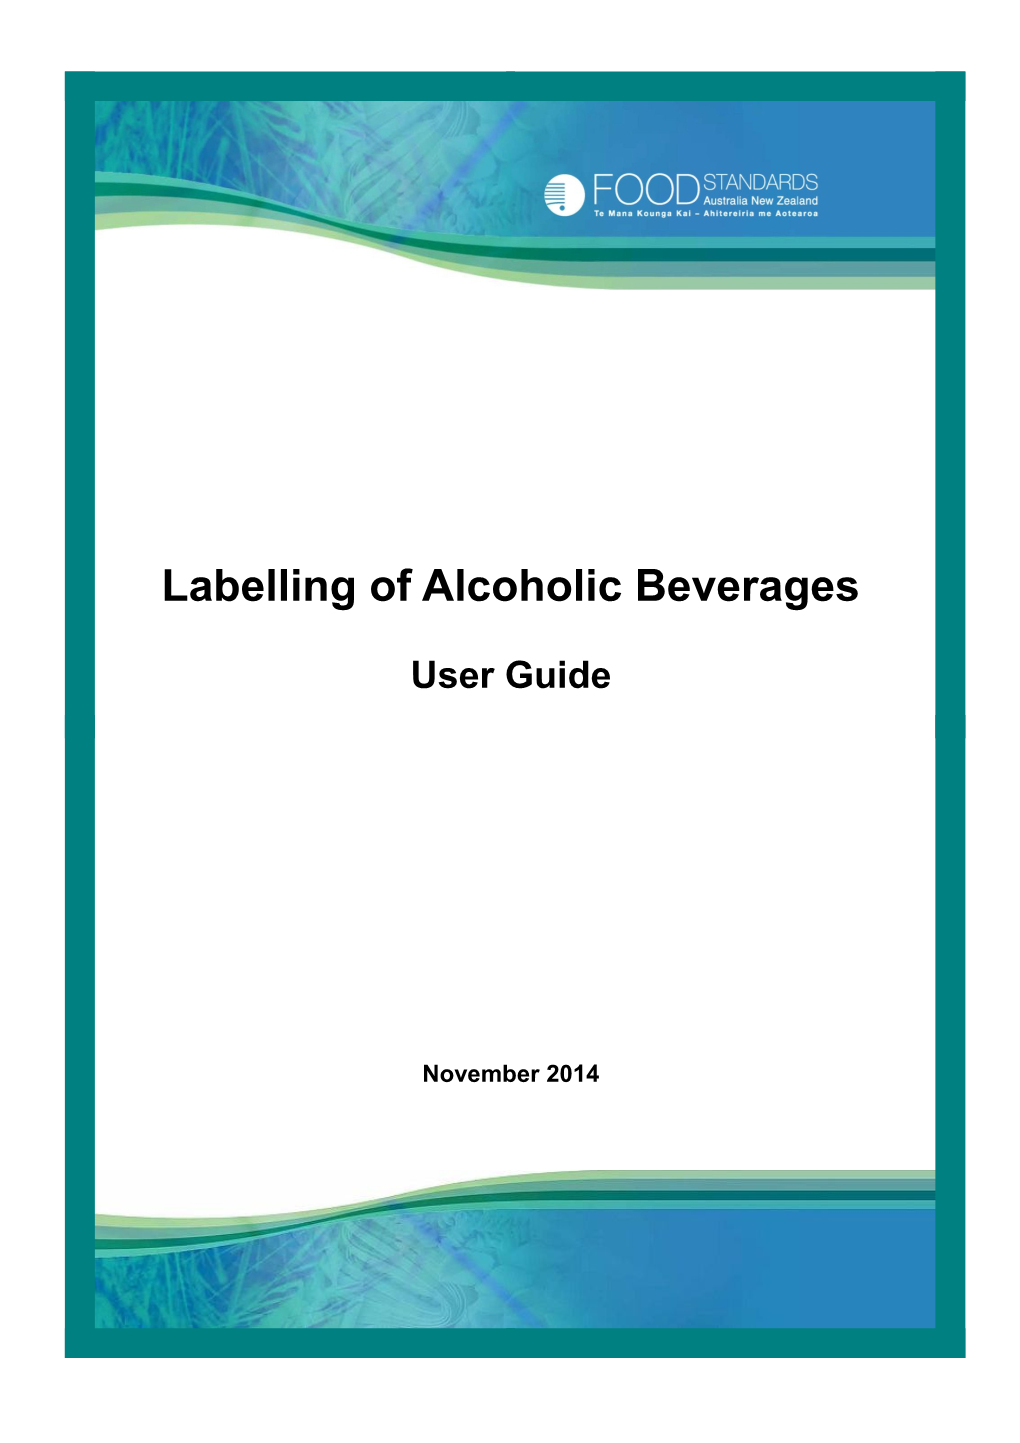 Labelling of Alcoholic Beverages